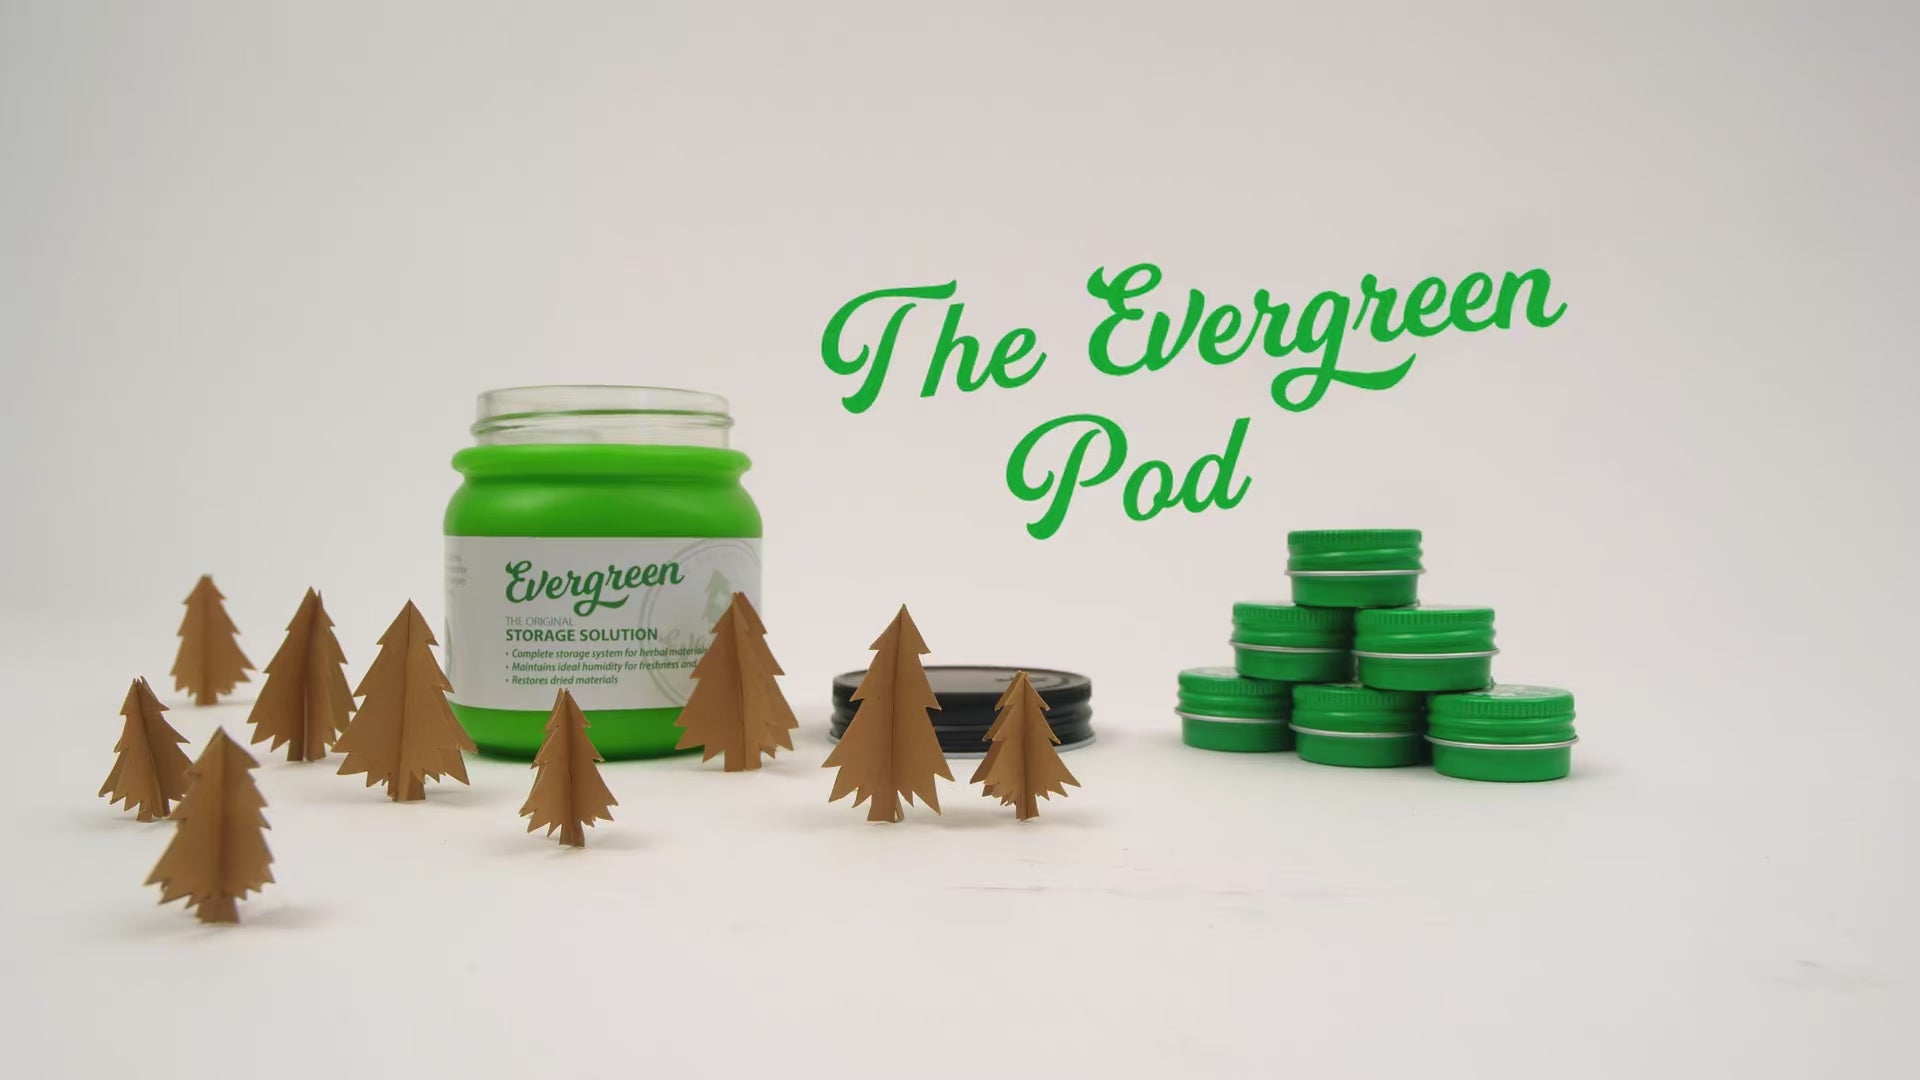 Load video: Video - how to use the Evergreen Pod